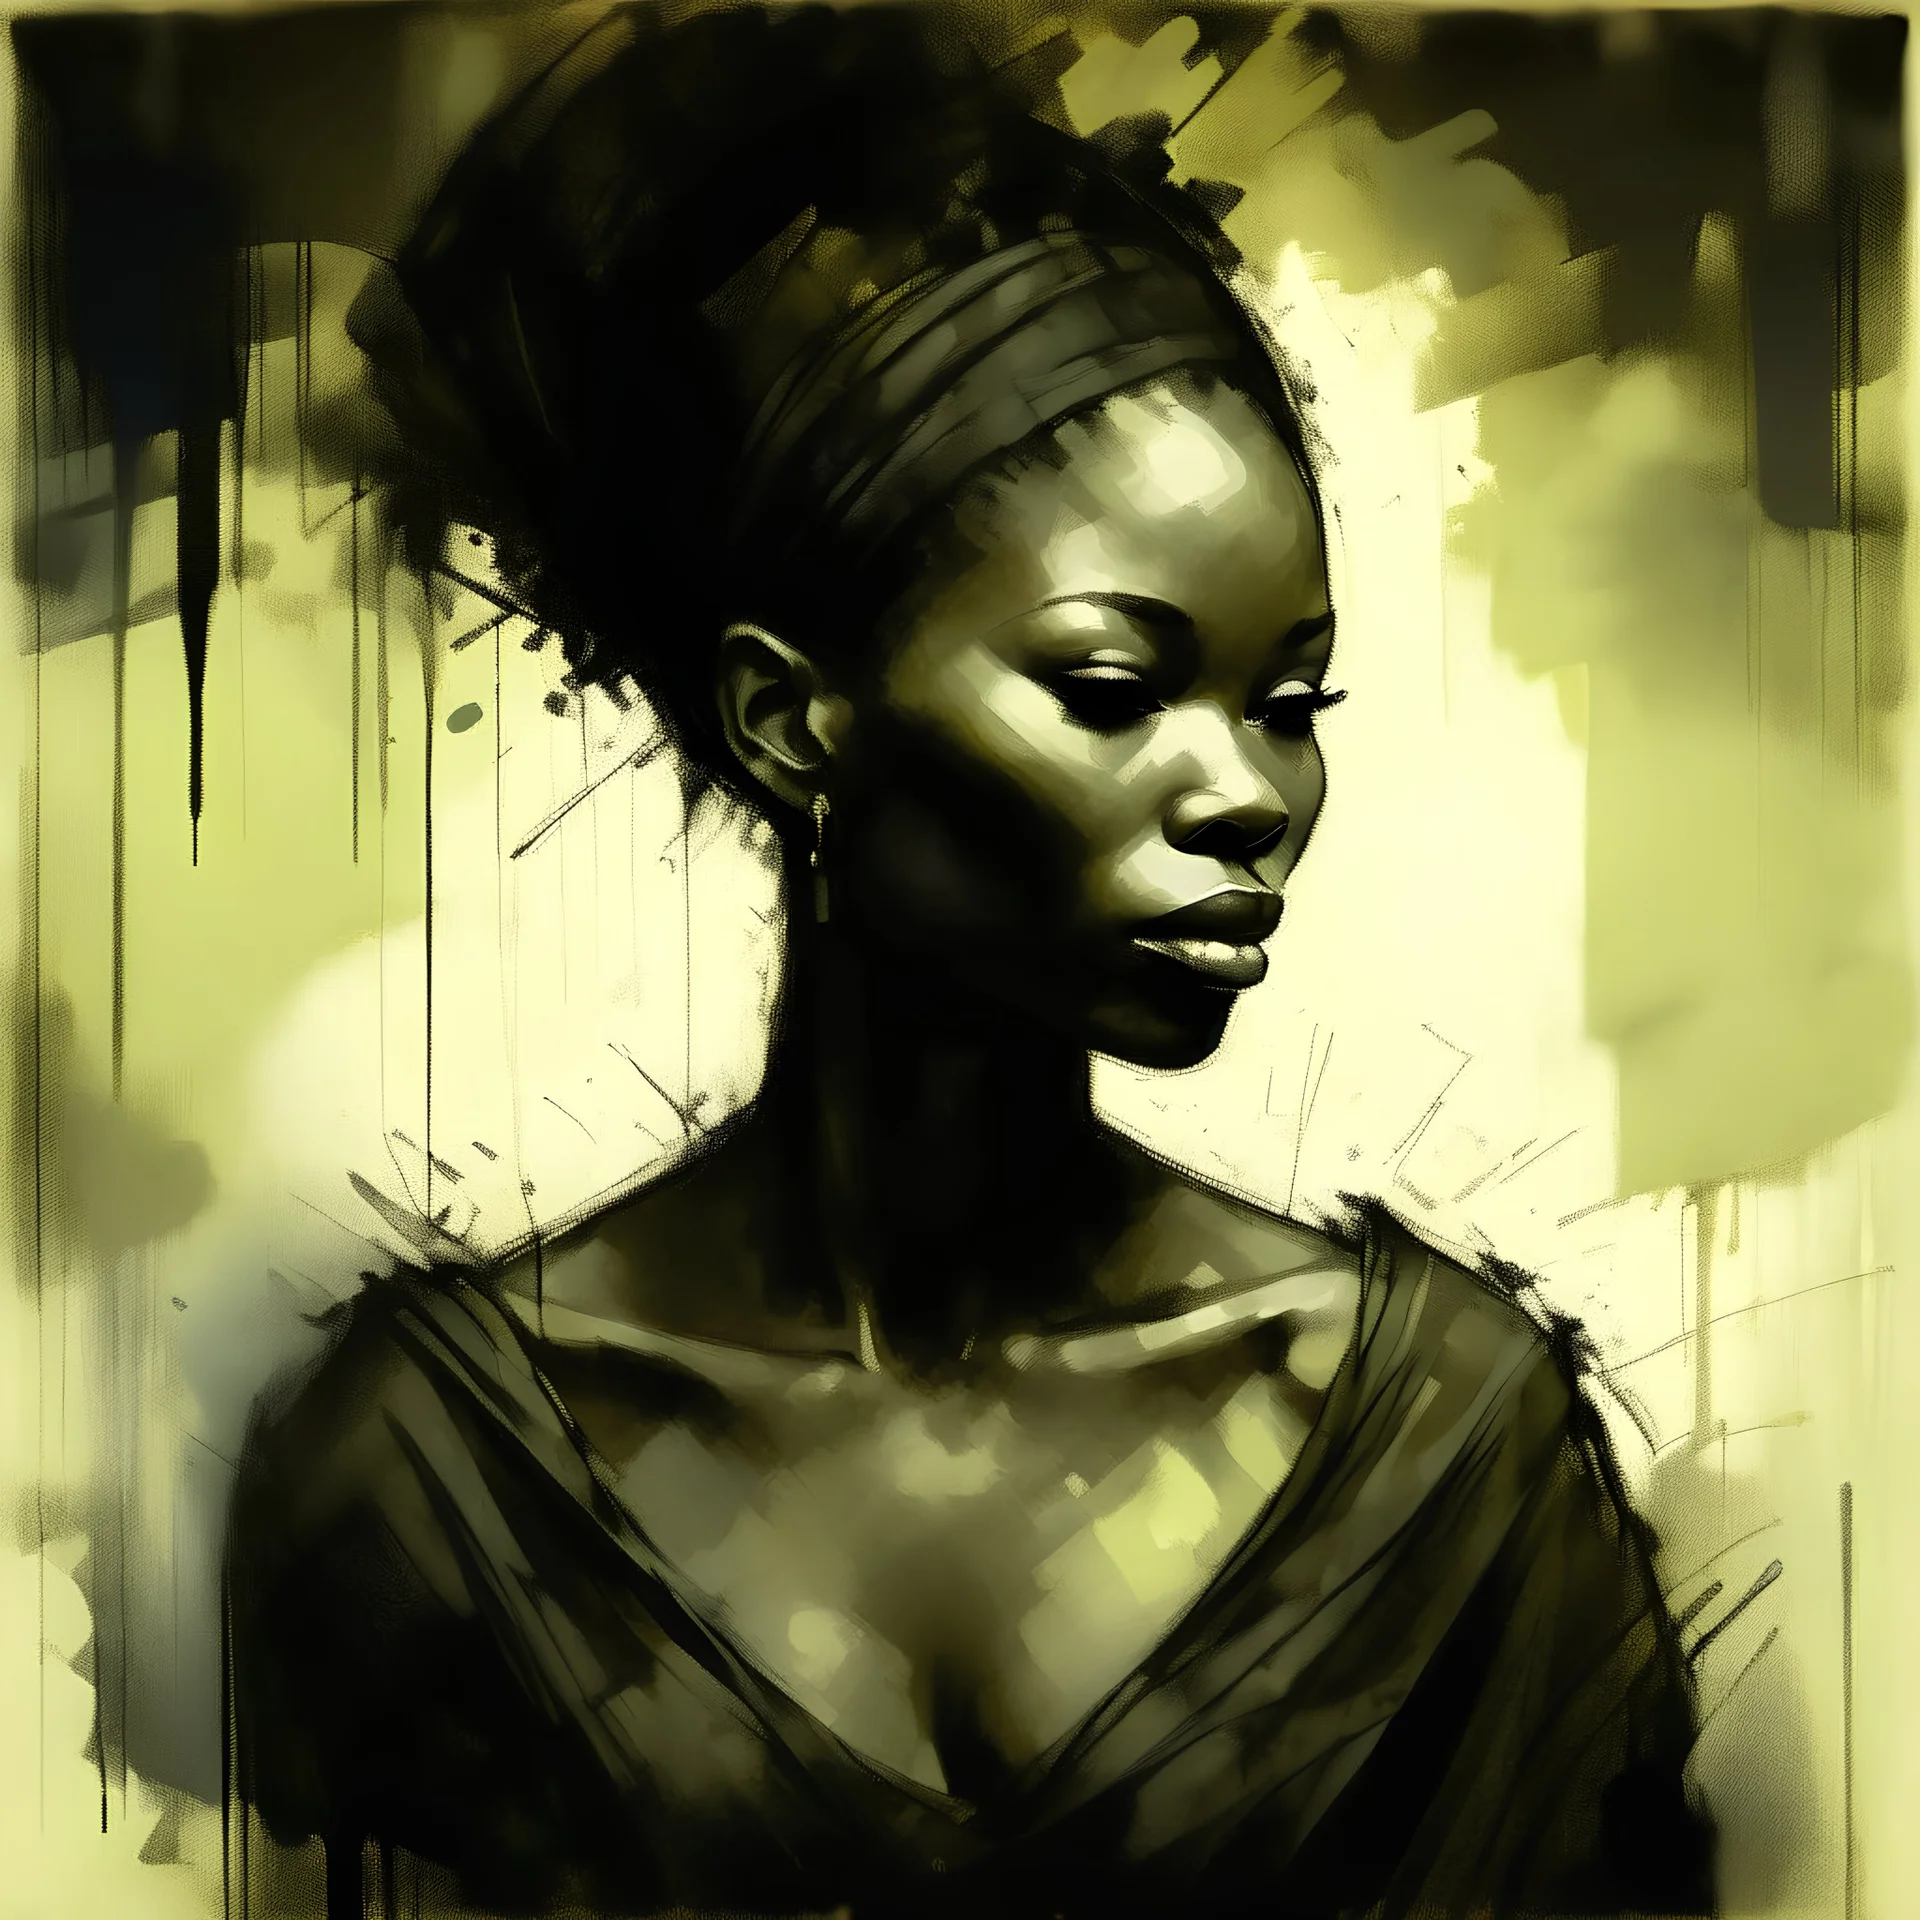 deep powerful evocative african portrait abstract painting,JEREMY MANN ,charcoal pencil strokedcross hatch technique minimalist illustration